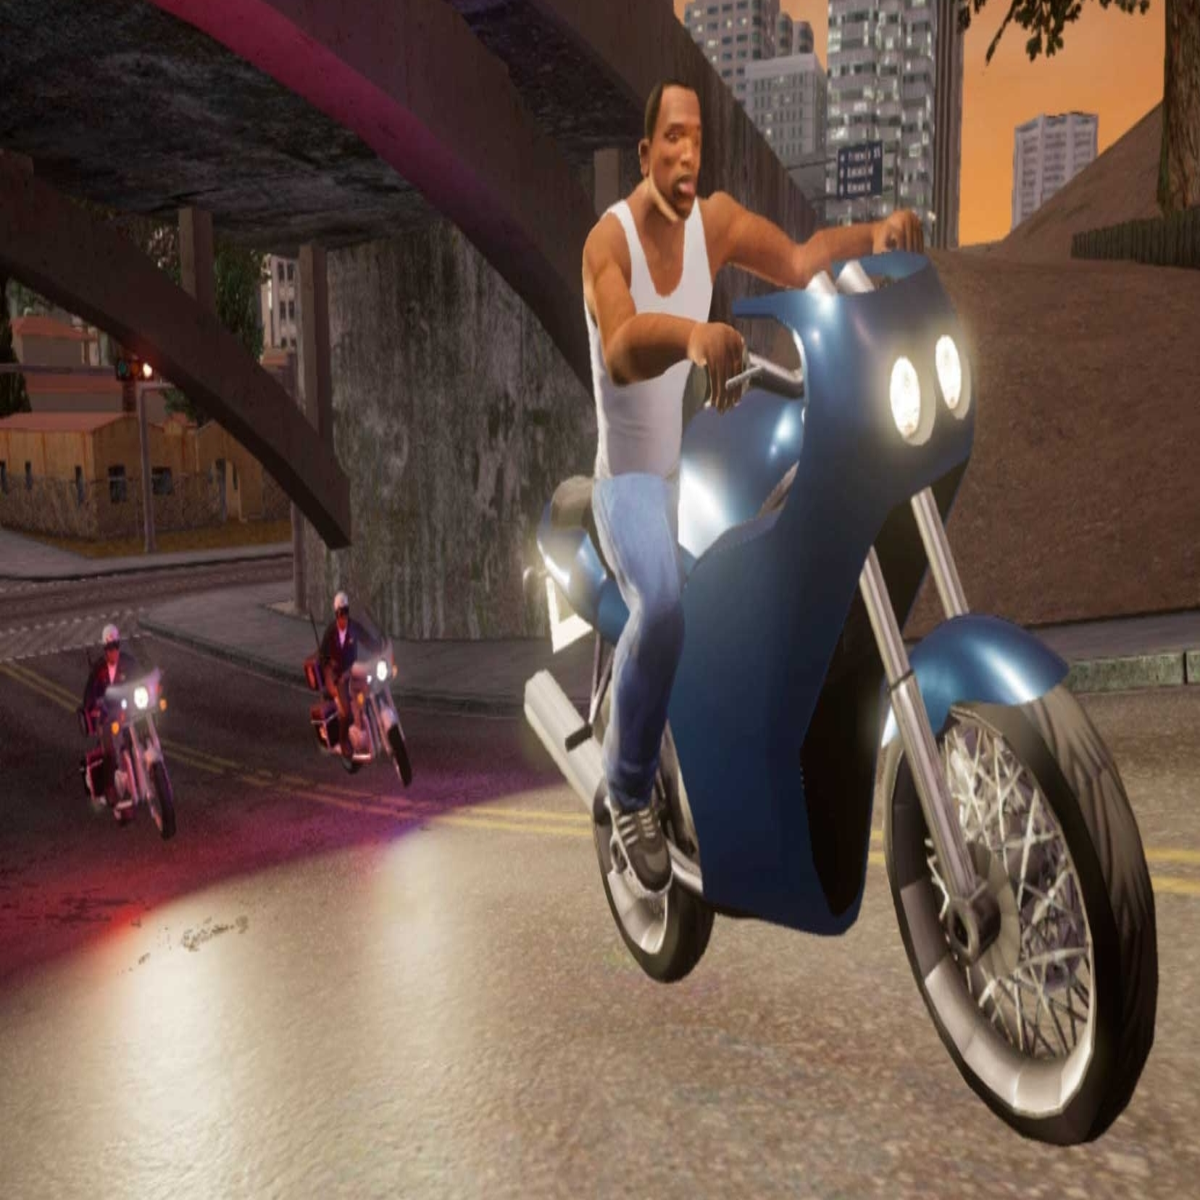 GTA: The Trilogy' screenshots for Nintendo Switch released by Rockstar